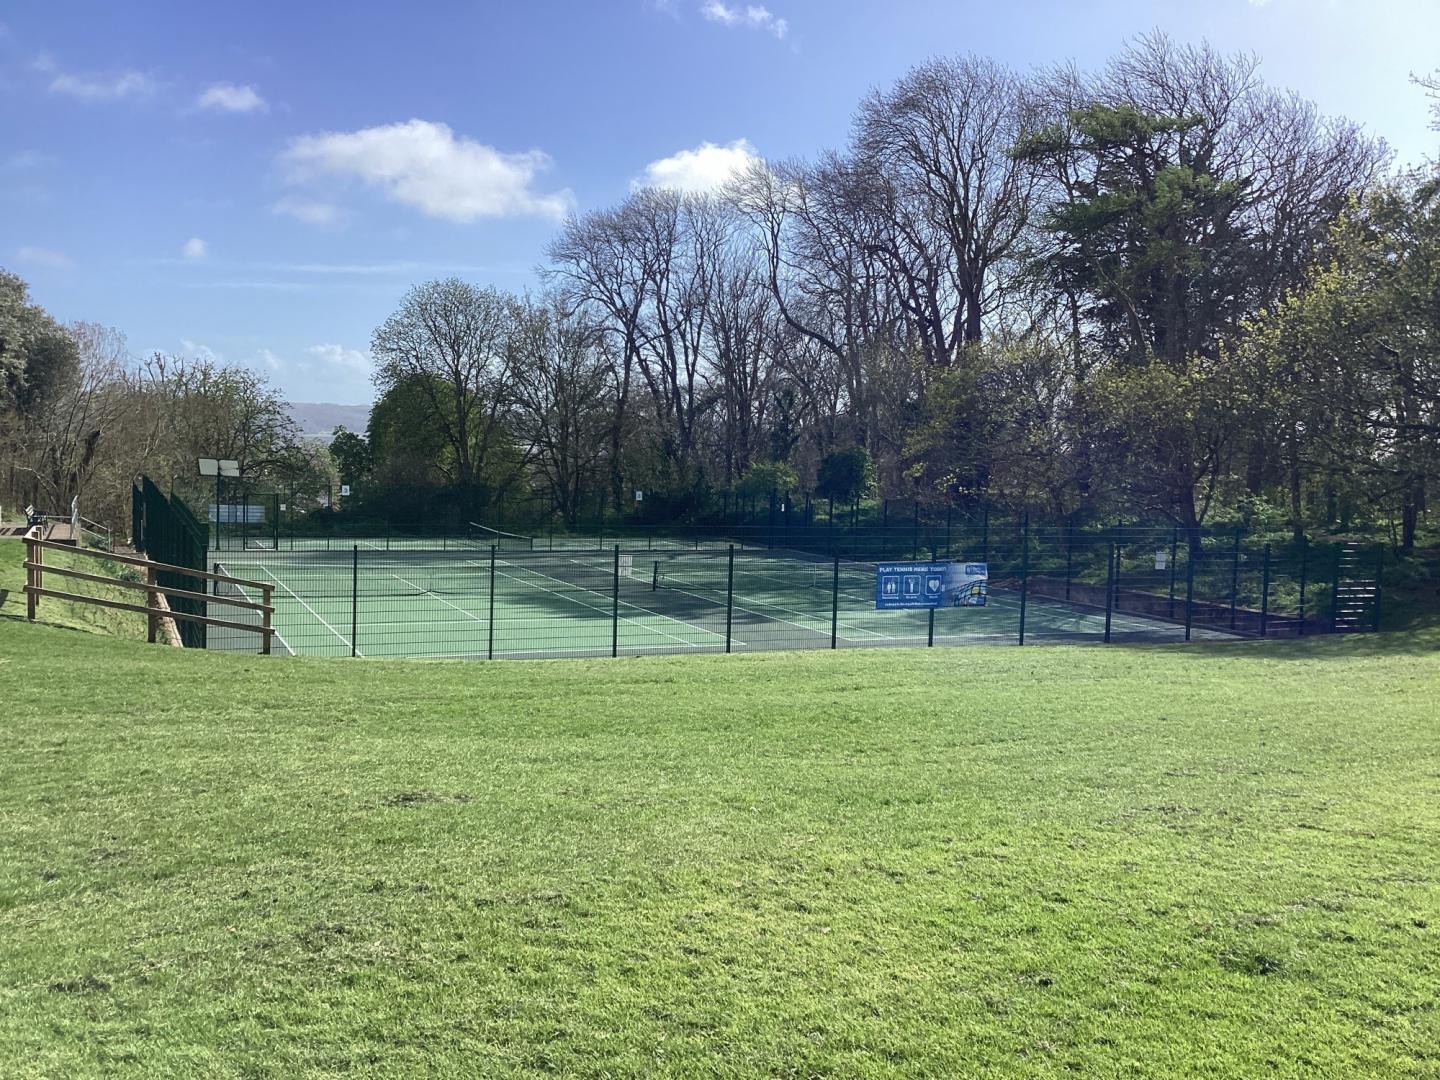 Ashcombe Park tennis courts from a distance